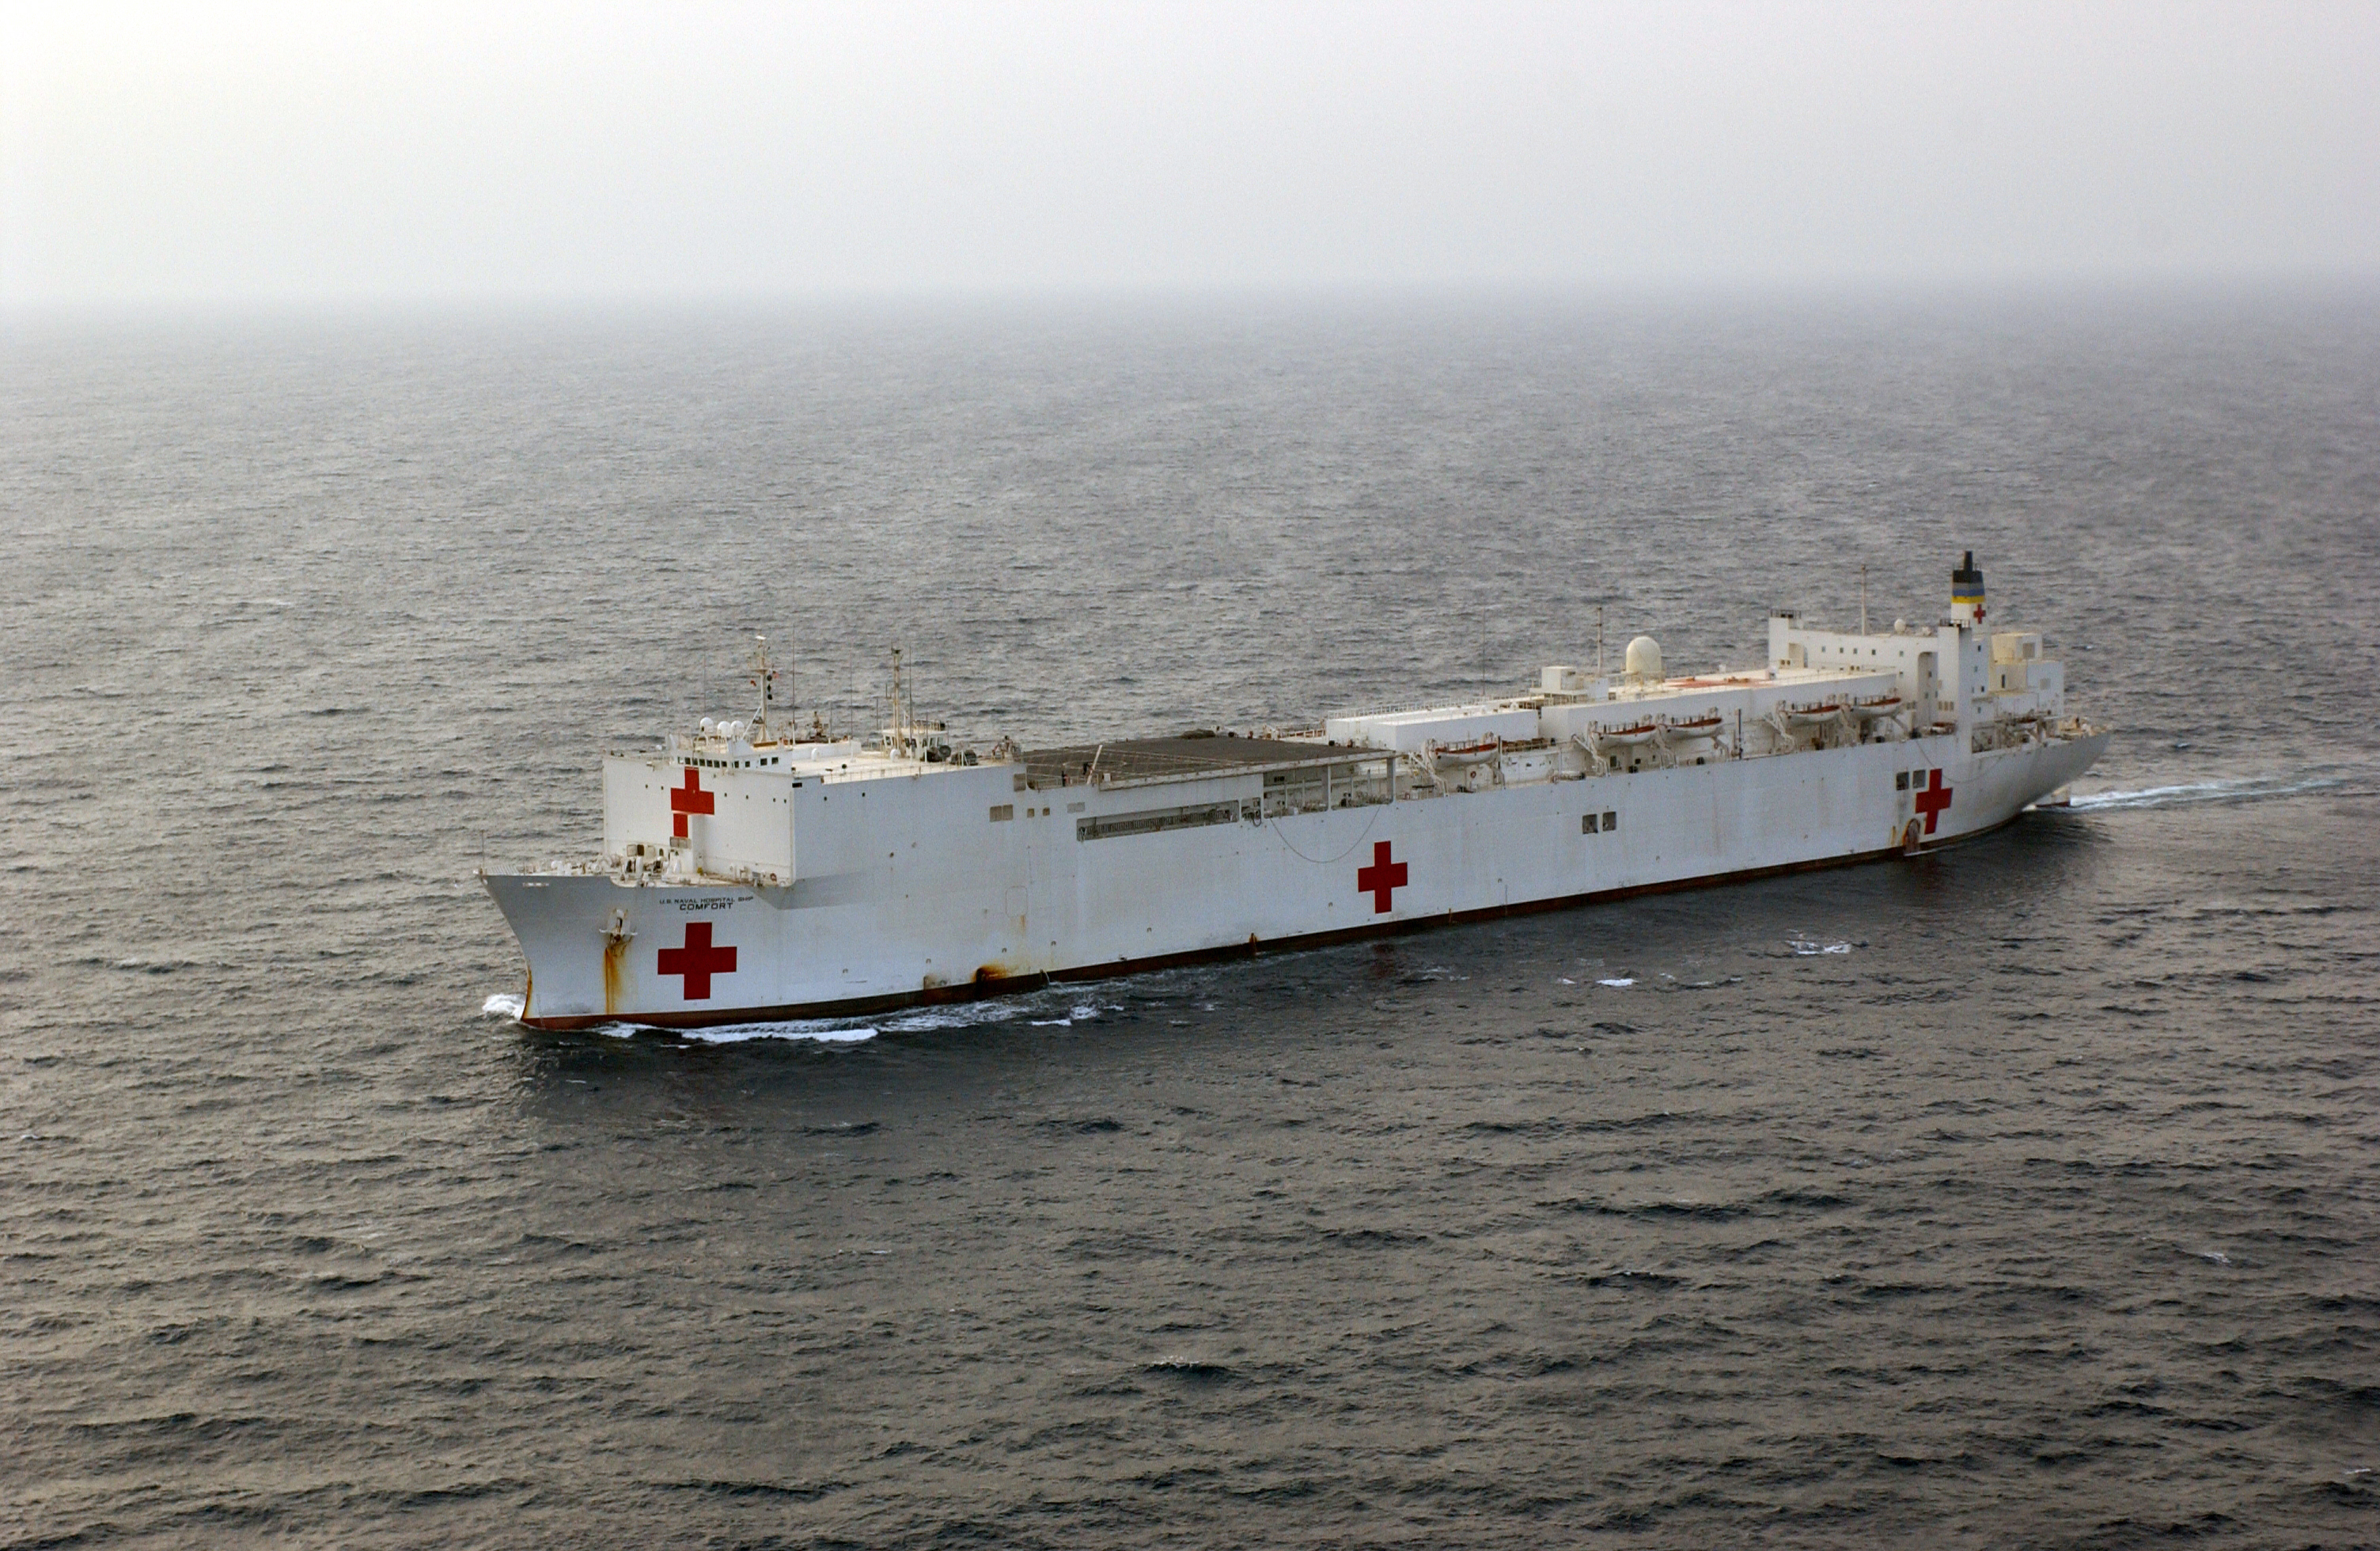 The Hospital Ship Usns Comfort  T Ah 20  Steams Through The Waters